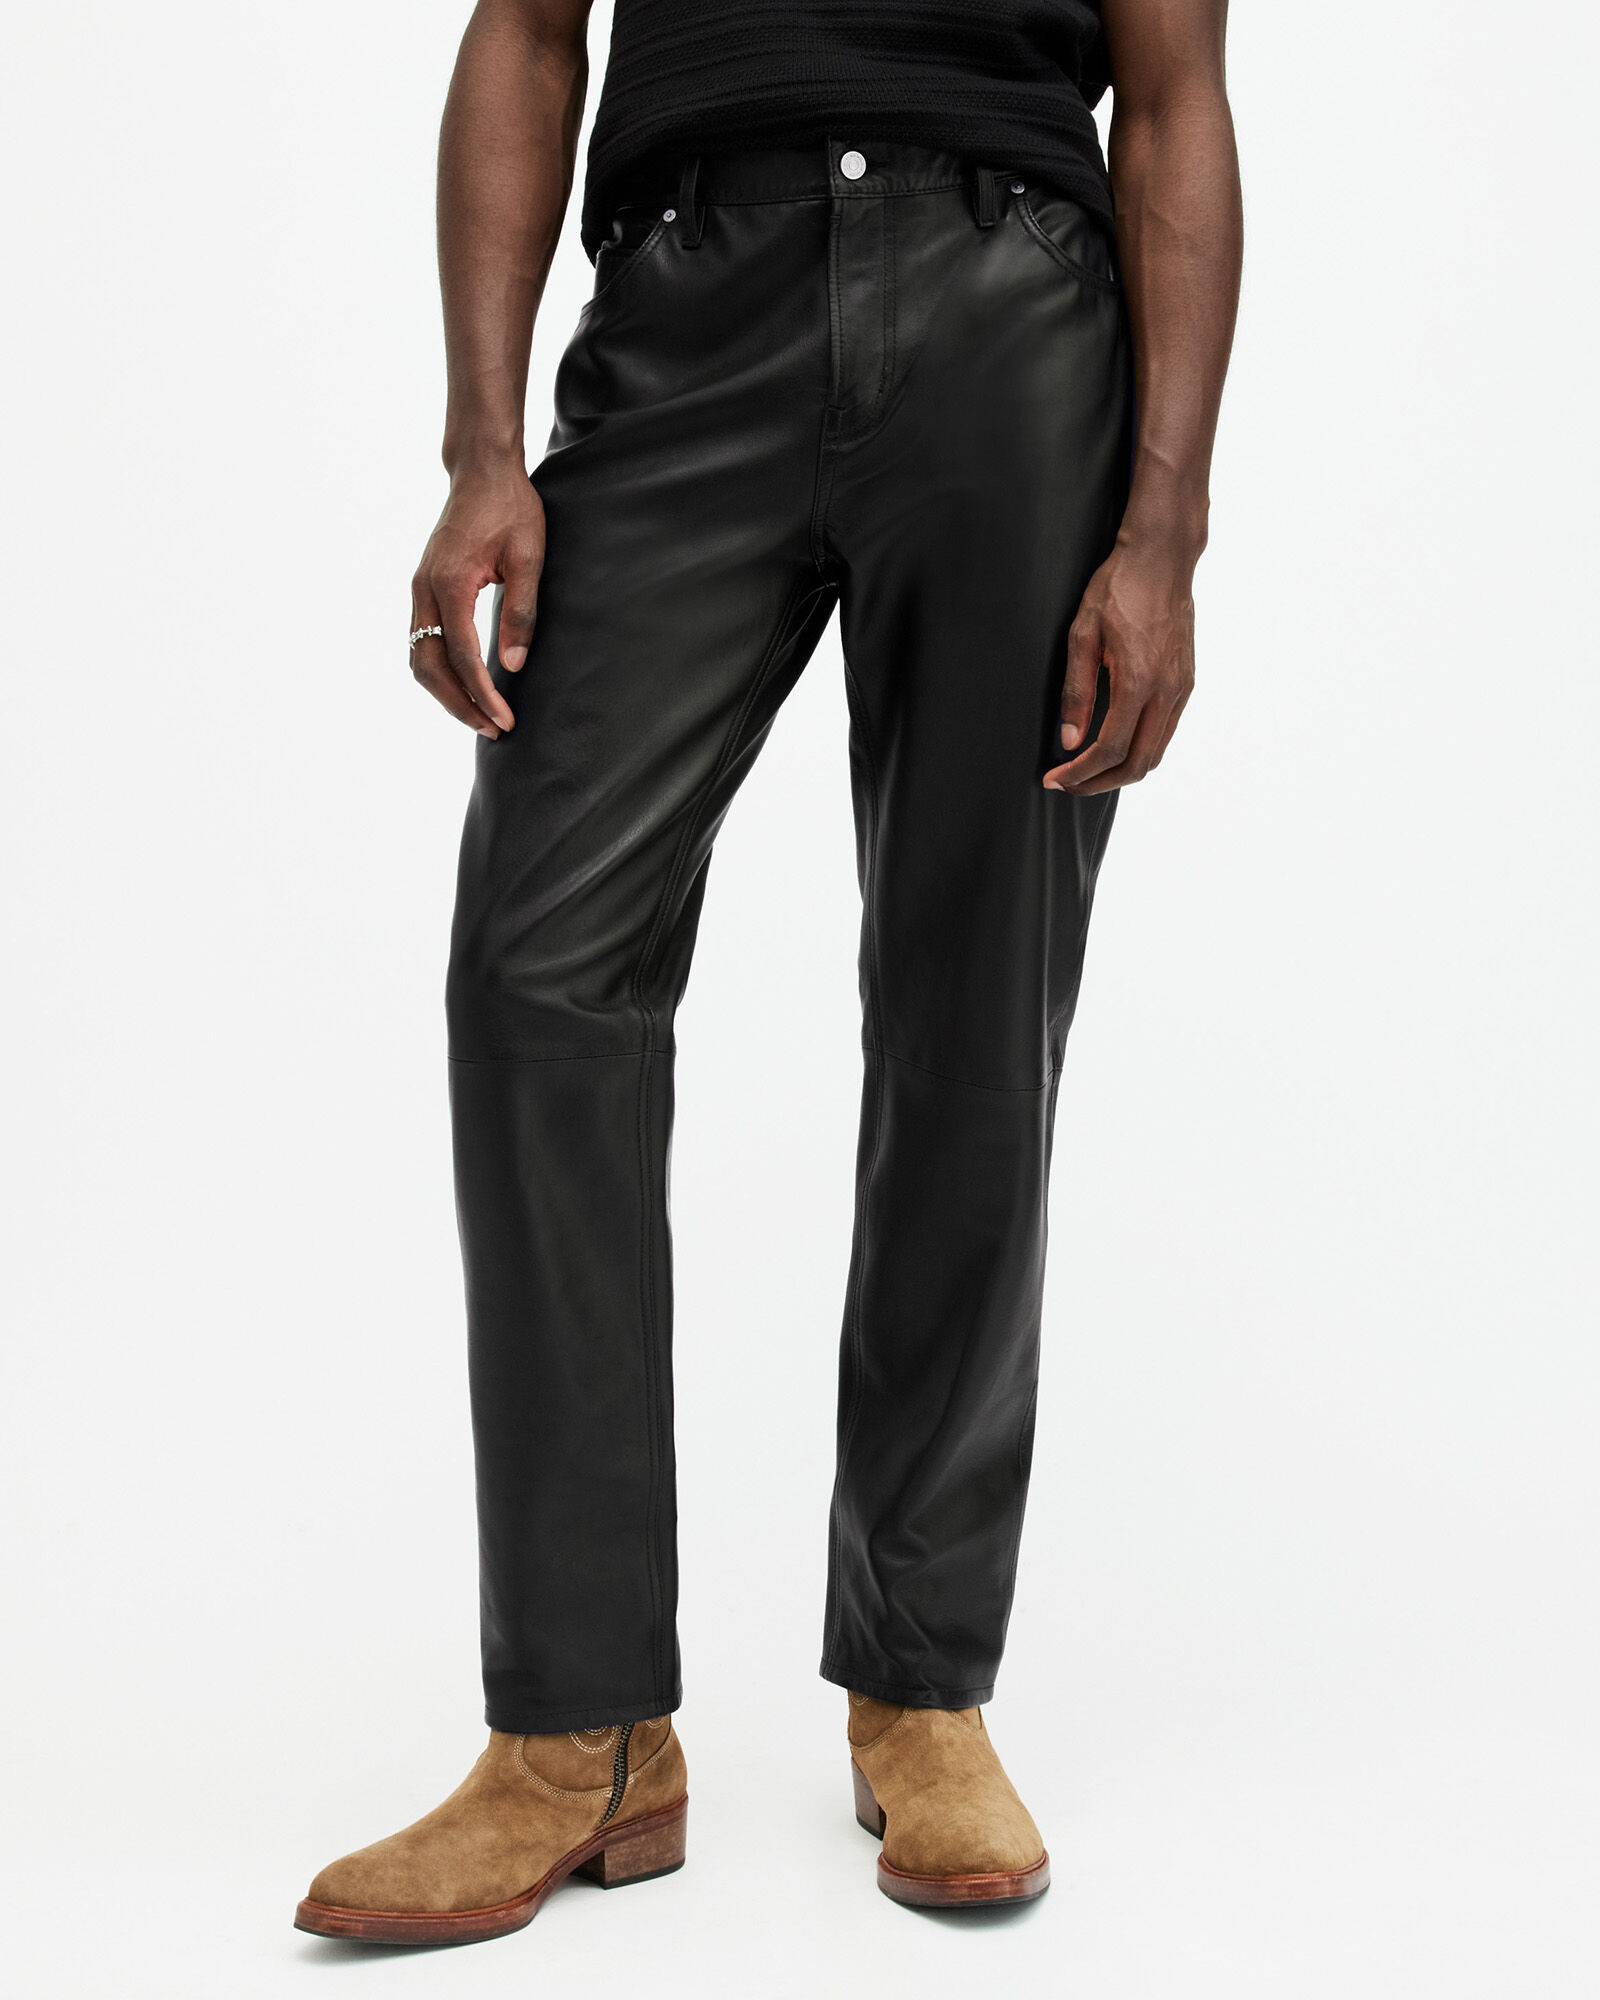 Classic Fitted (Motorcycle or Casual) Men's Leather Biker Pants Trousers –  Gallanto.co.uk Online Shopping : Leather Jackets, Bags, Textile Jackets,  Trousers, Biker's Accessories